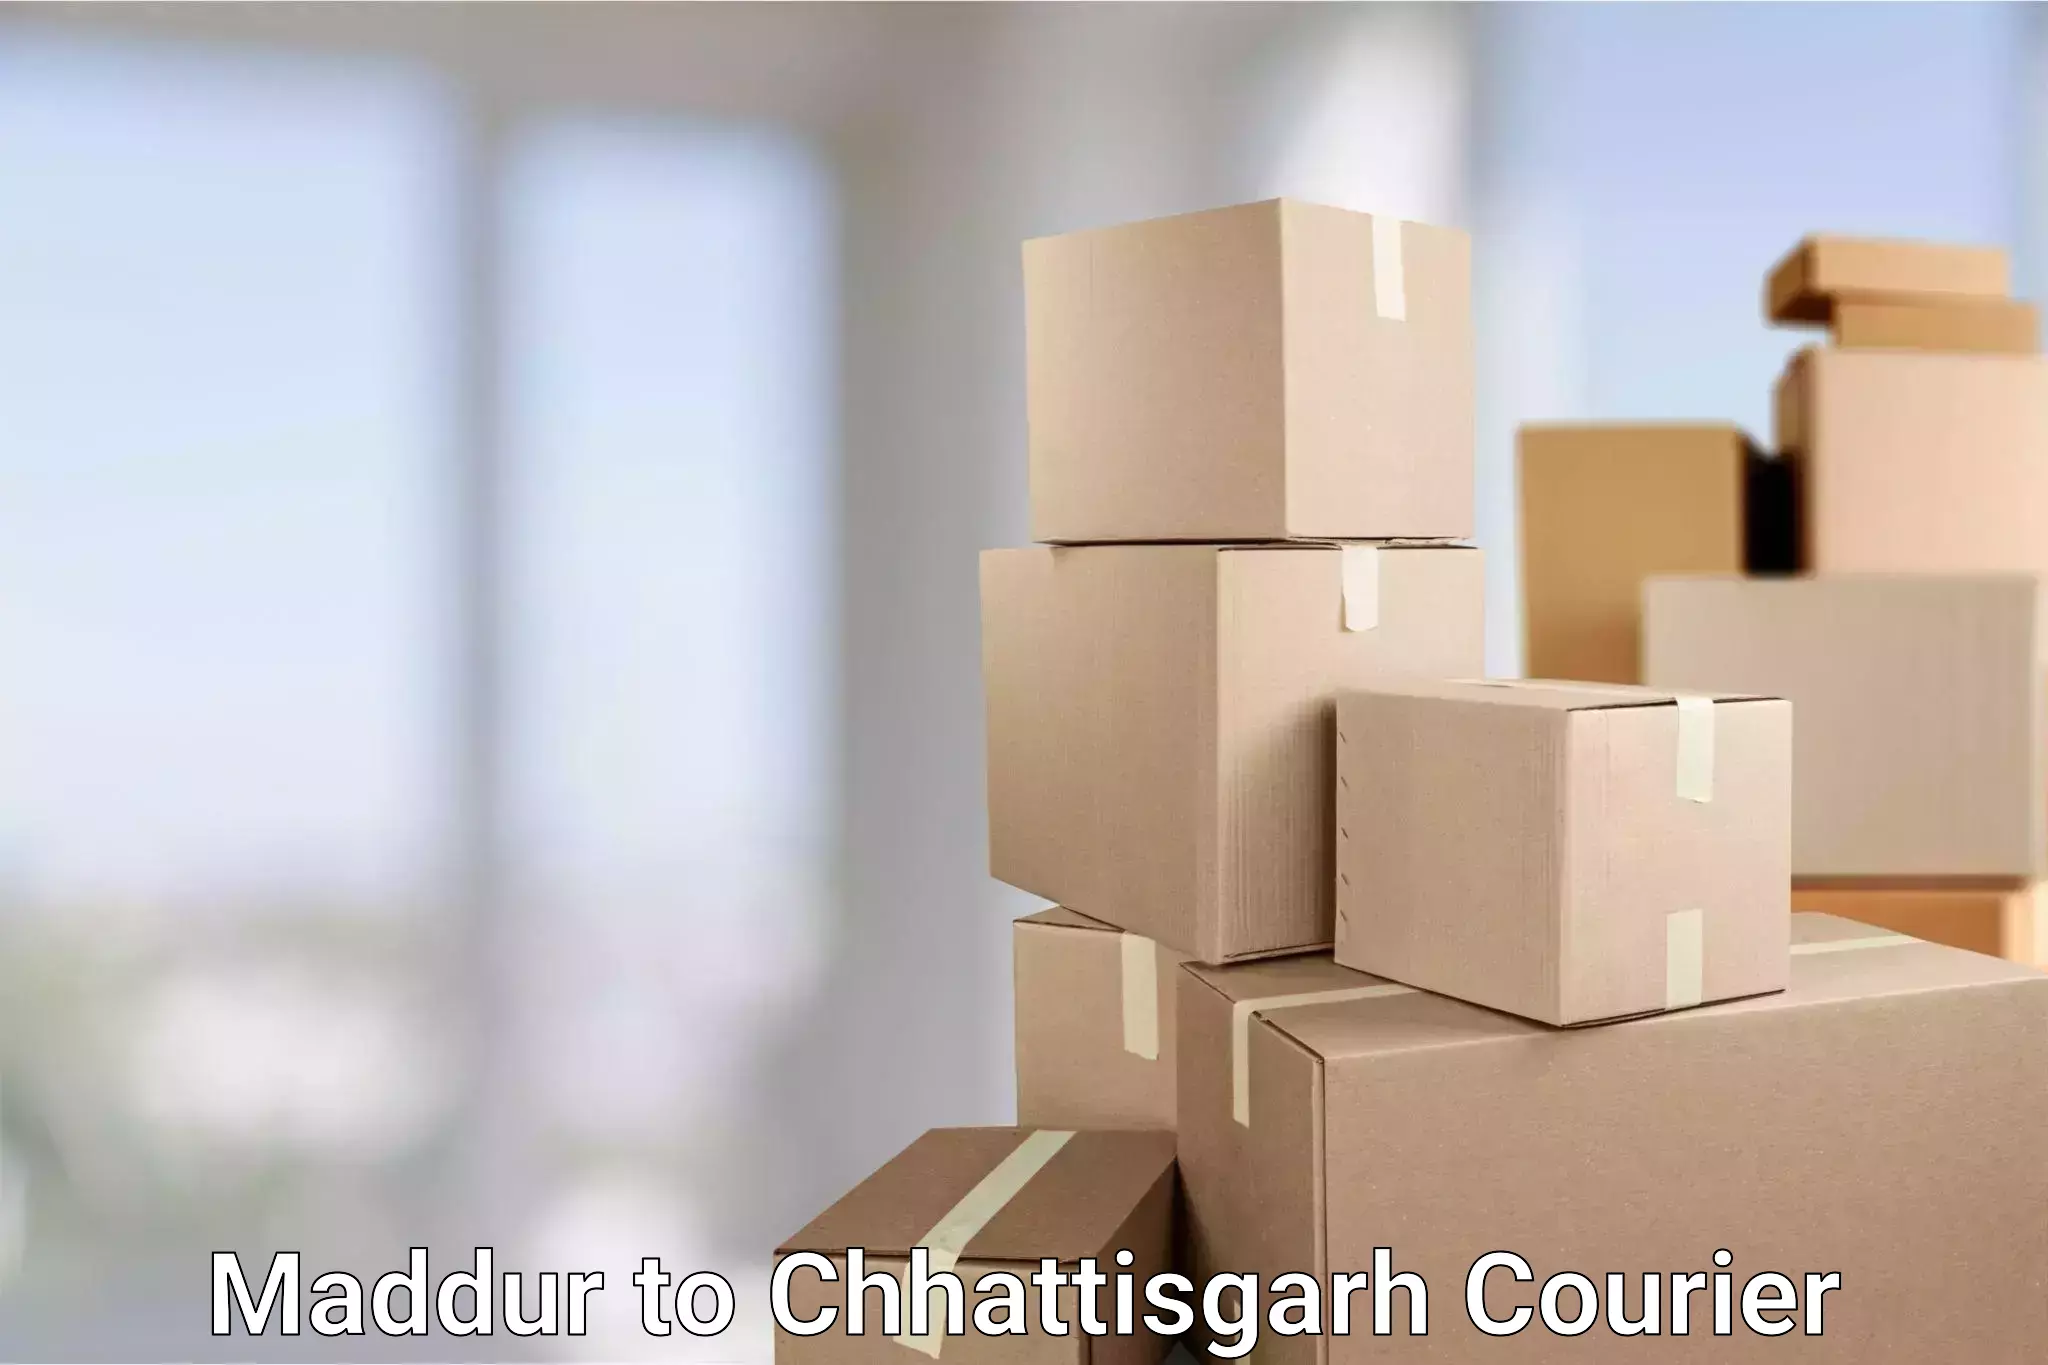 Reliable shipping partners in Maddur to Chhattisgarh